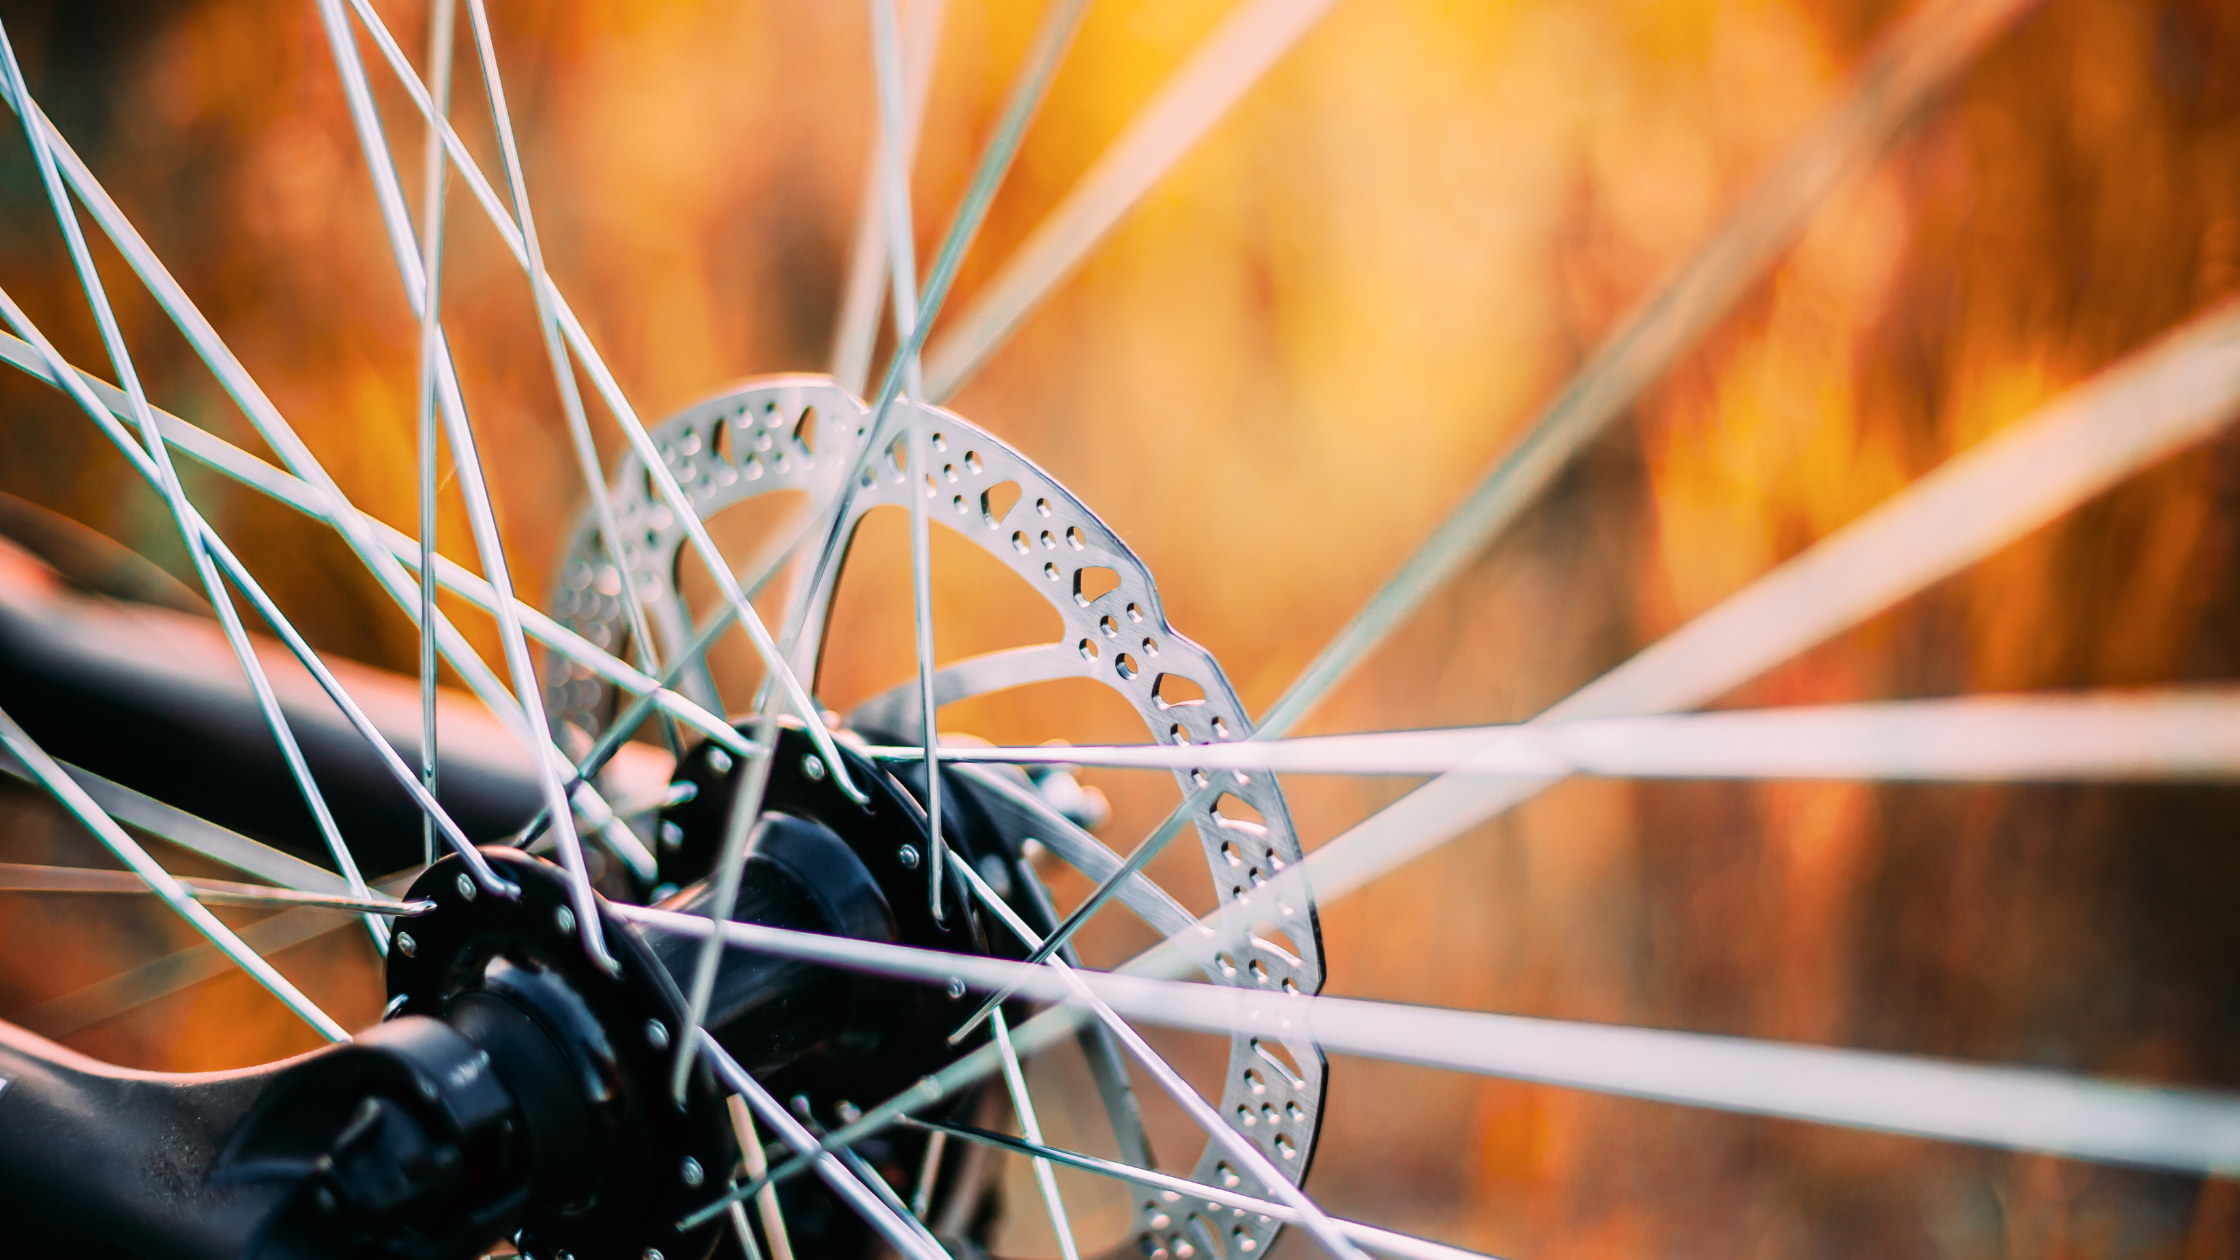 A bicycle wheel